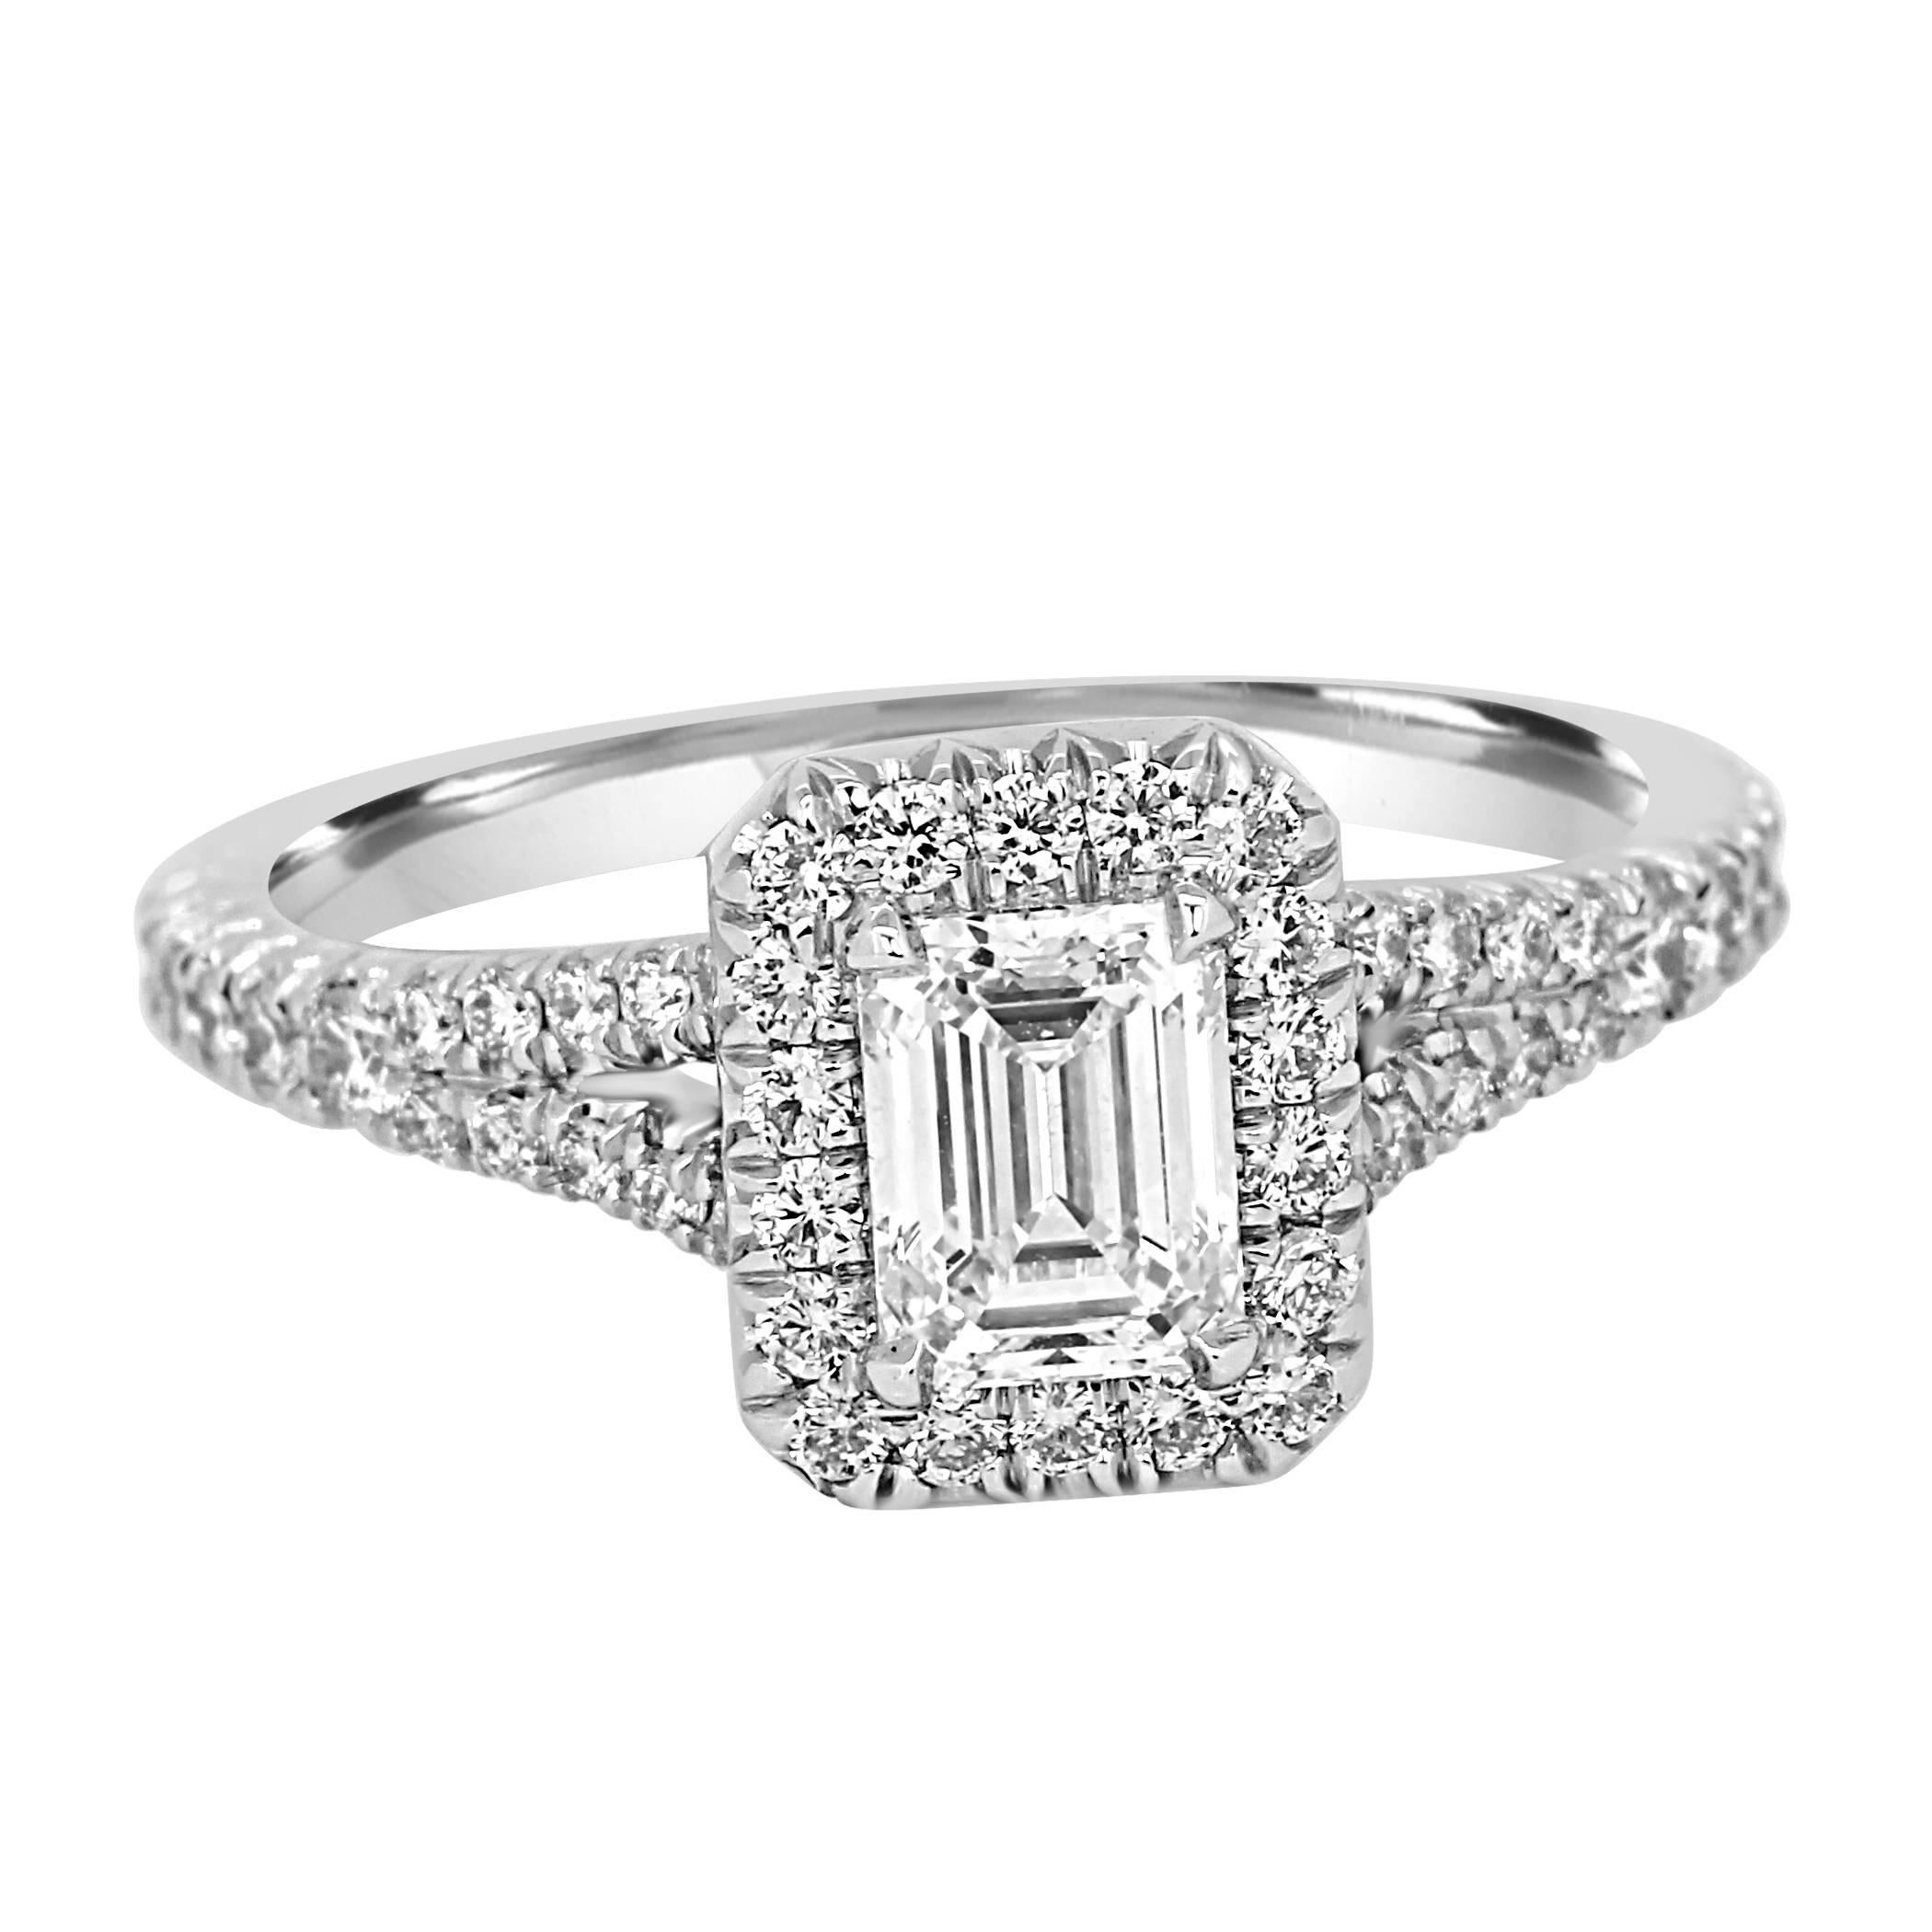 Stunning GIA Certified D Color VS 2 Clarity Emerald Cut Diamond 0.70 Carat Encircled in a Halo of White Round Diamonds 0.48 Carat in 18K White Gold and Platinum Split Shank Bridal Engagement Ring.

Style available in different price ranges. Prices